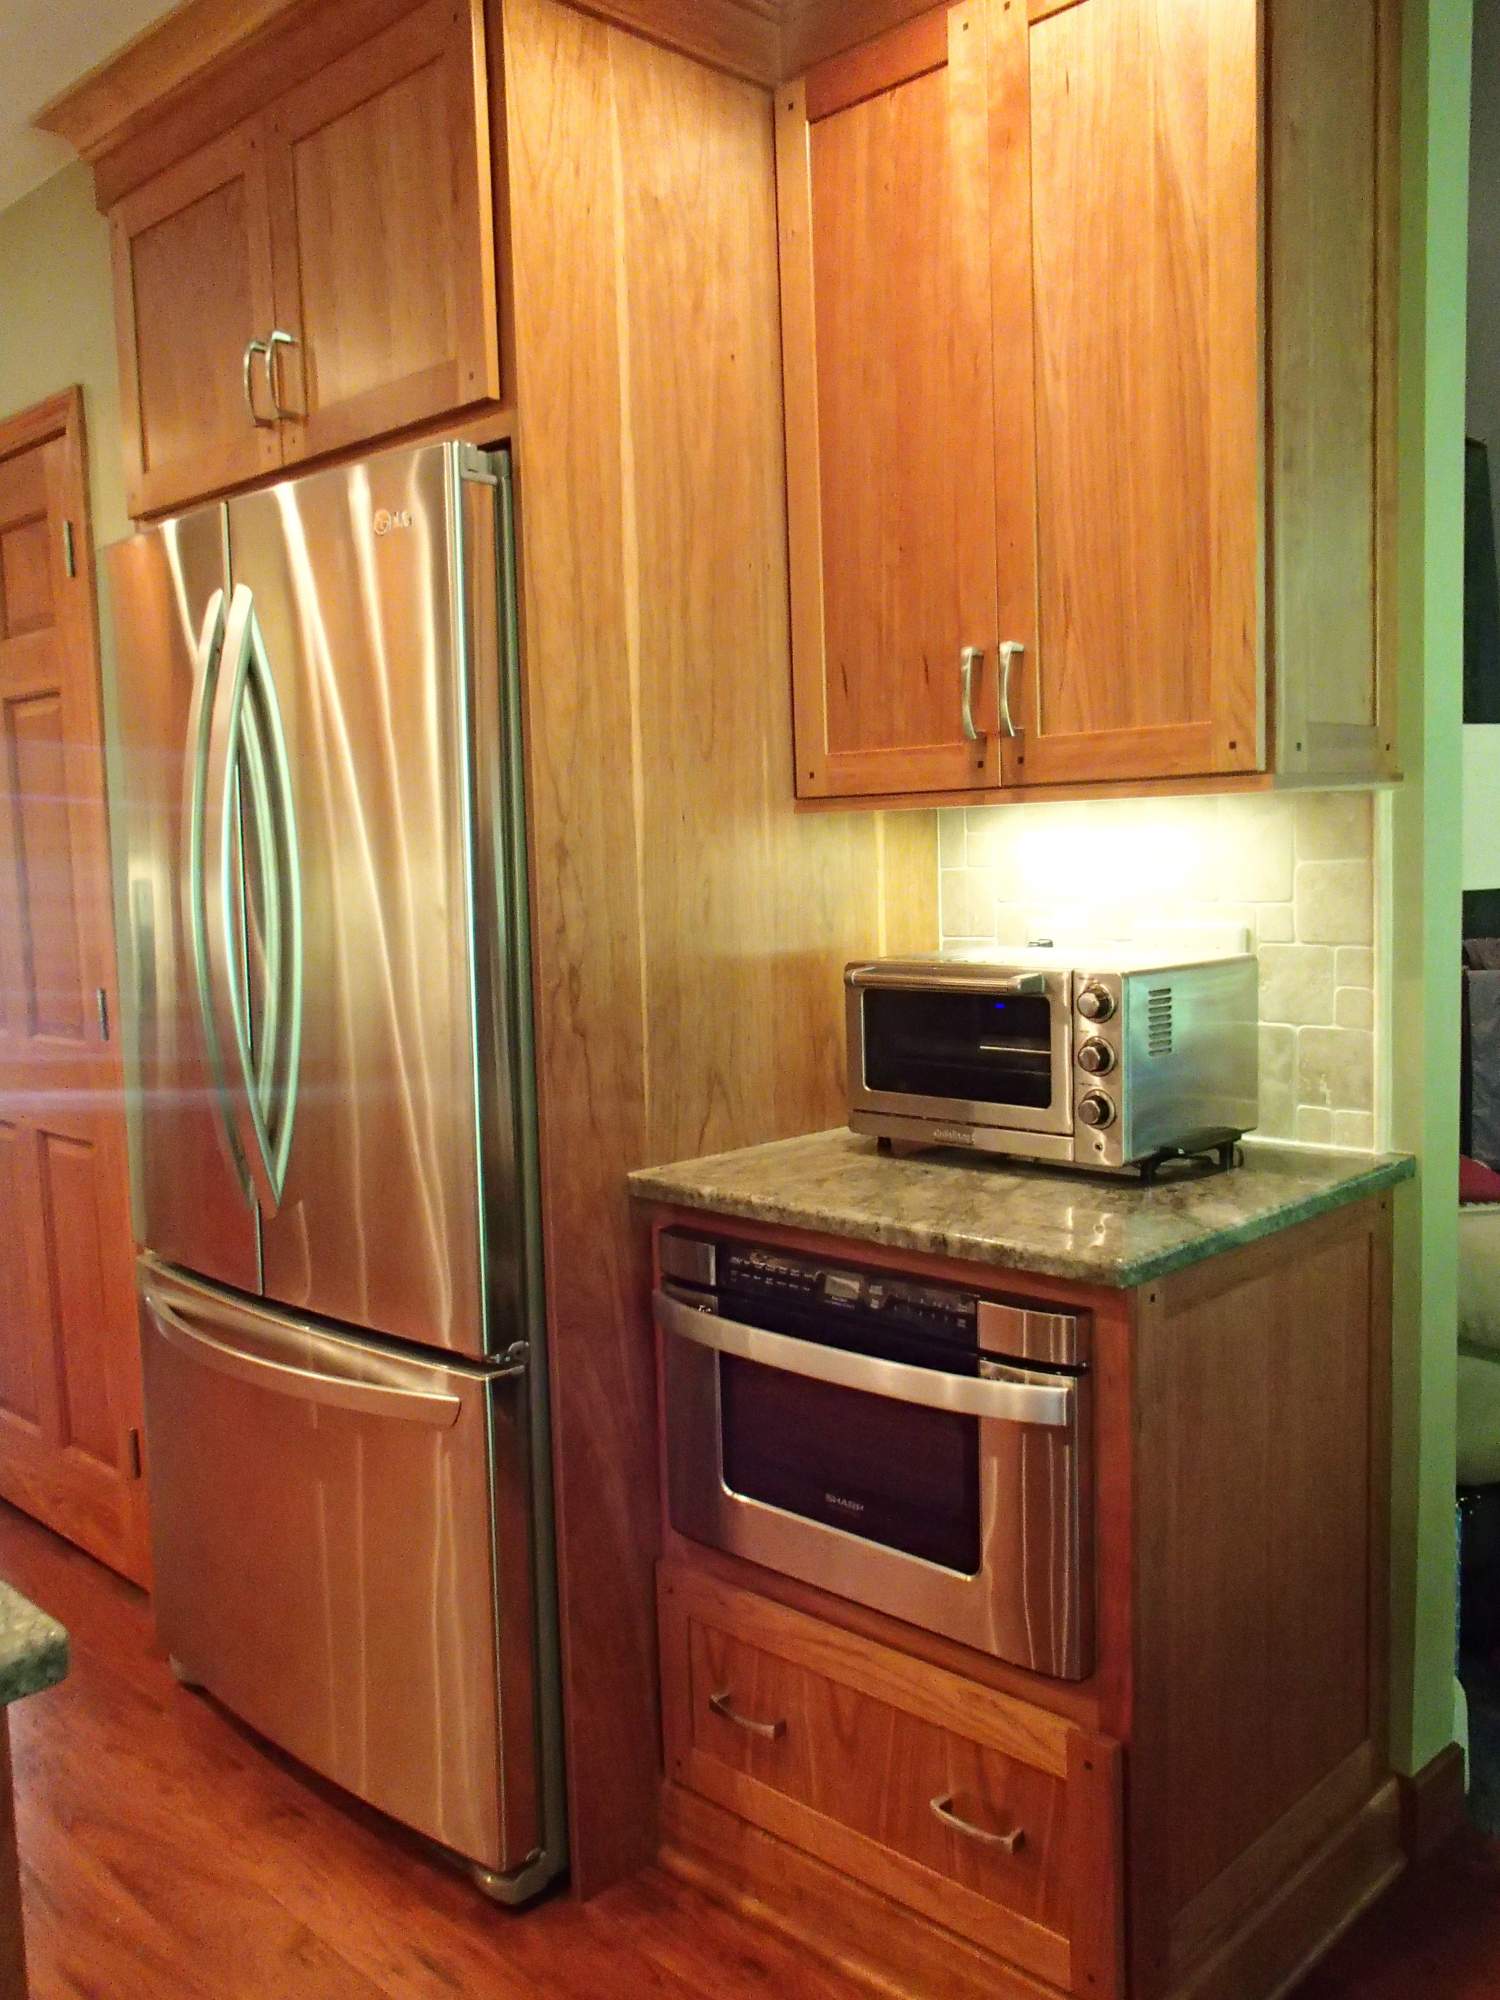 Artisan Style Kitchen > Kitchens > Projects > Repp Renovations